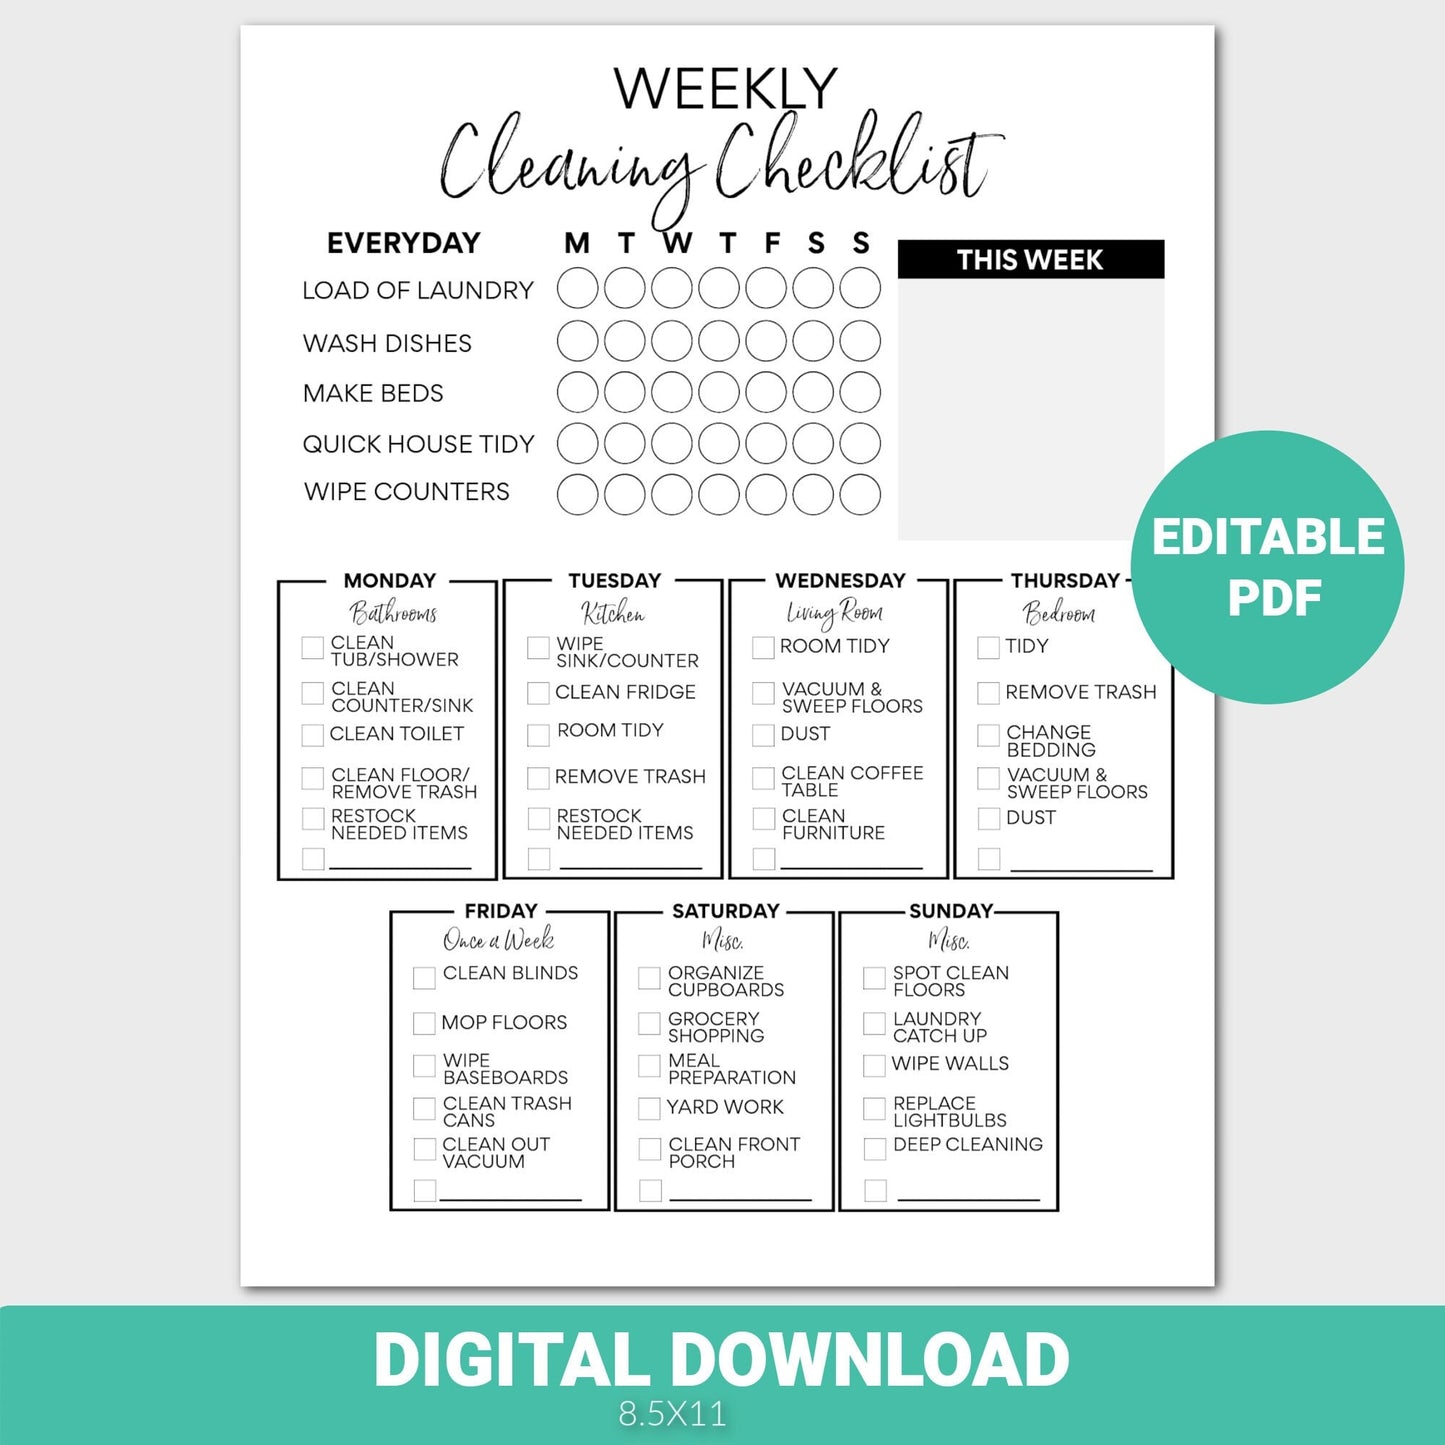 Editable Cleaning Schedule, Weekly Cleaning Checklist, Cleaning Planner, Chore List, House Chores, Instant Download, PDF